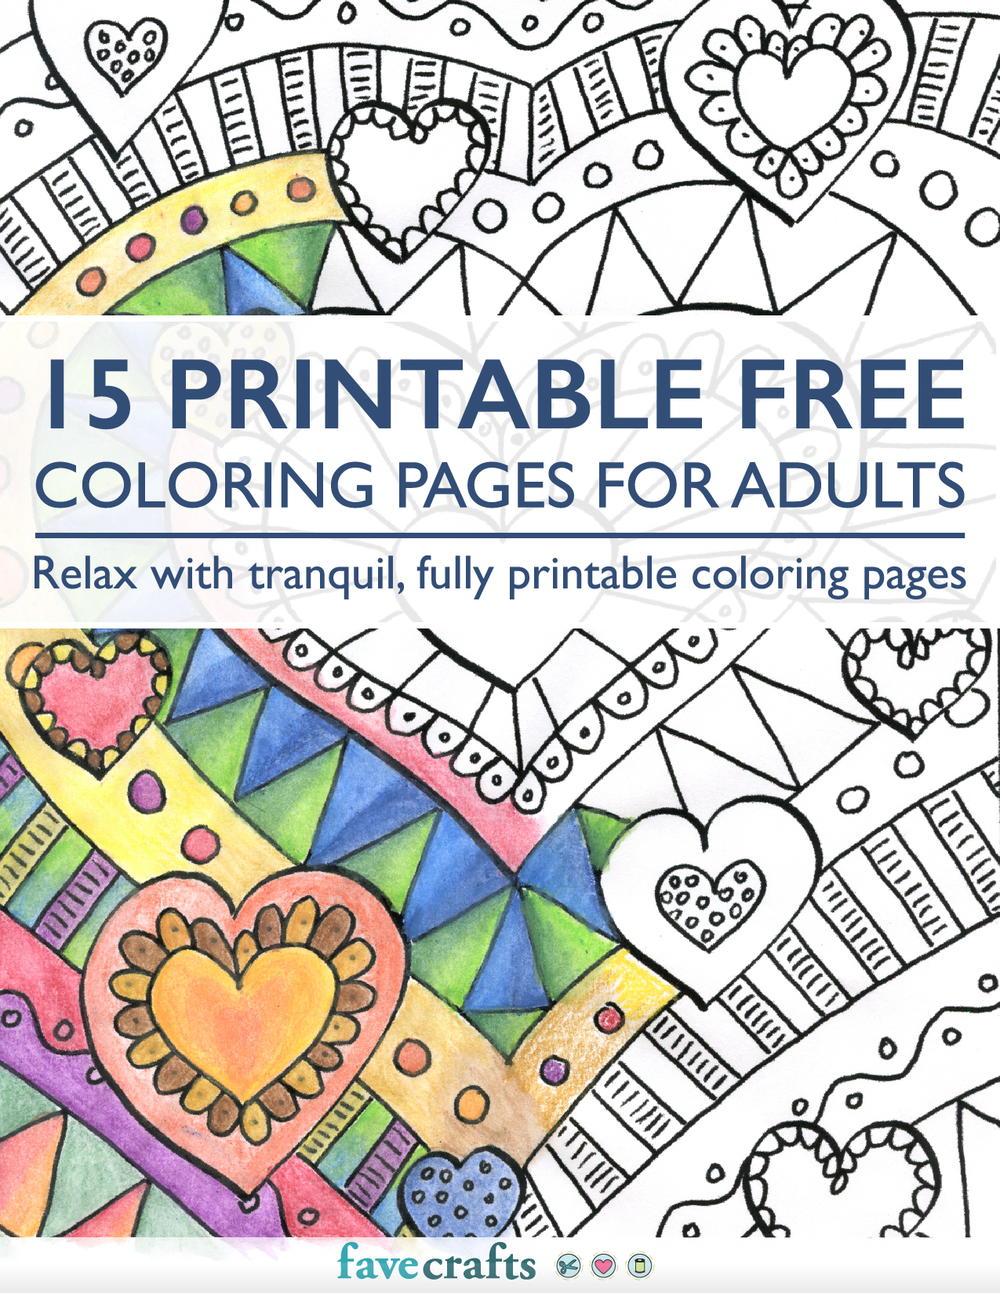 Download 15 Printable Free Coloring Pages for Adults PDF | FaveCrafts.com